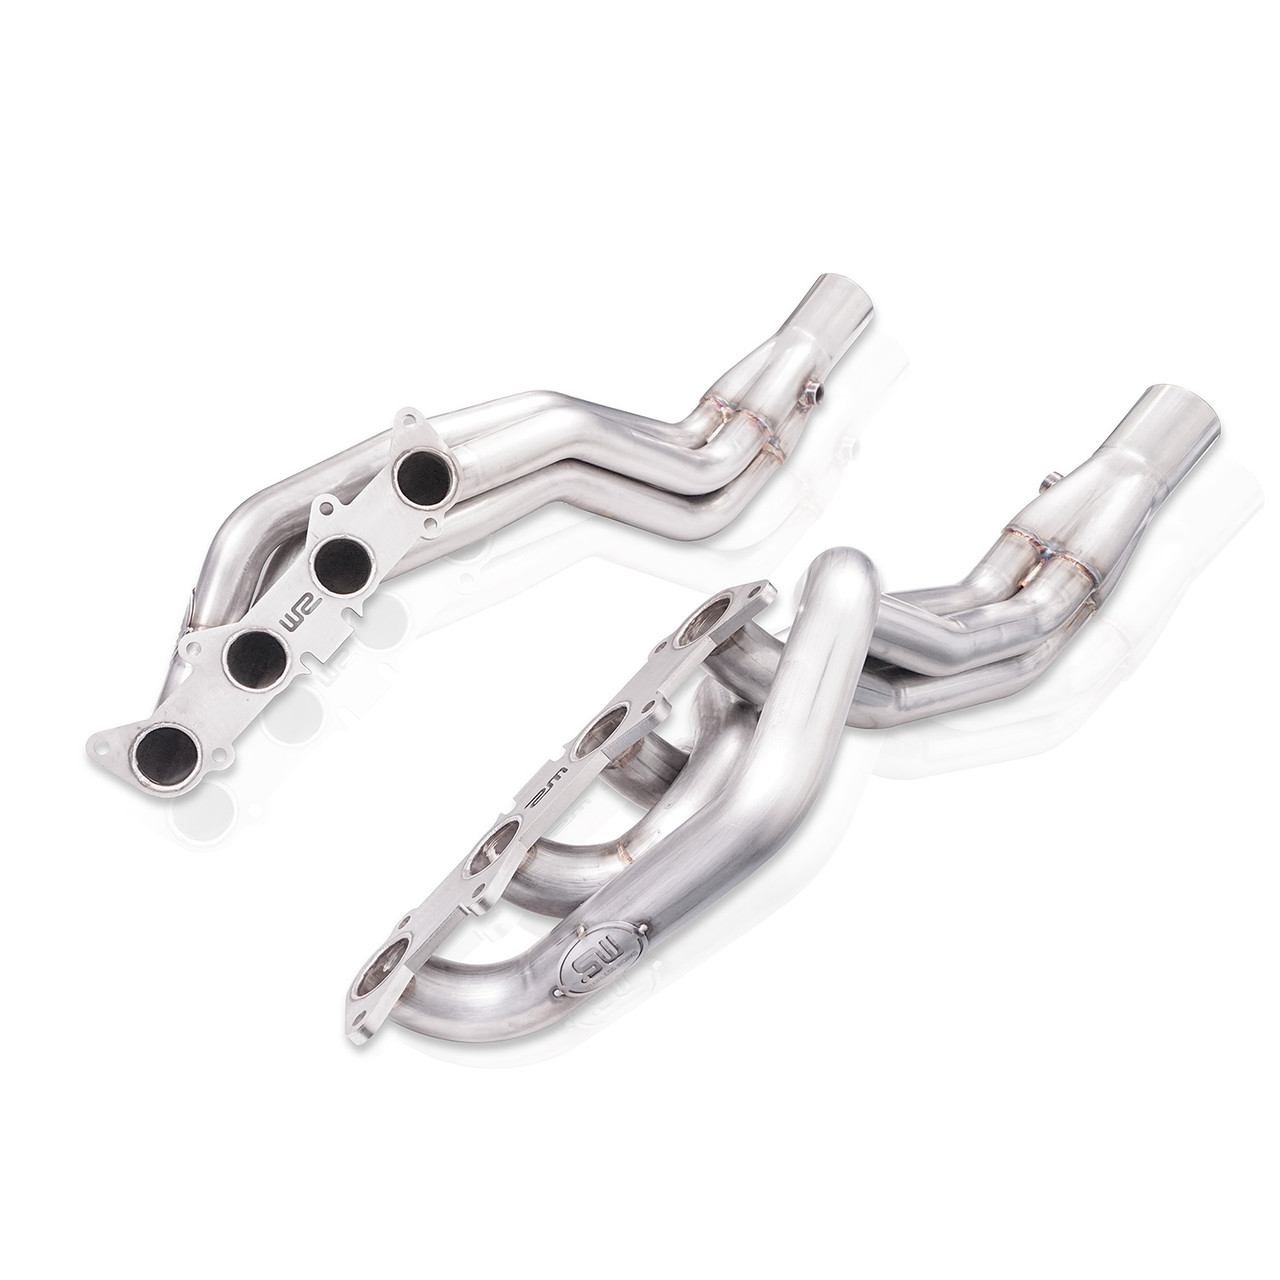 Stainless Power 1 7/8" Long Tube Headers w. High Flow Cats / Aftermarket Connect - S550 Mustang GT